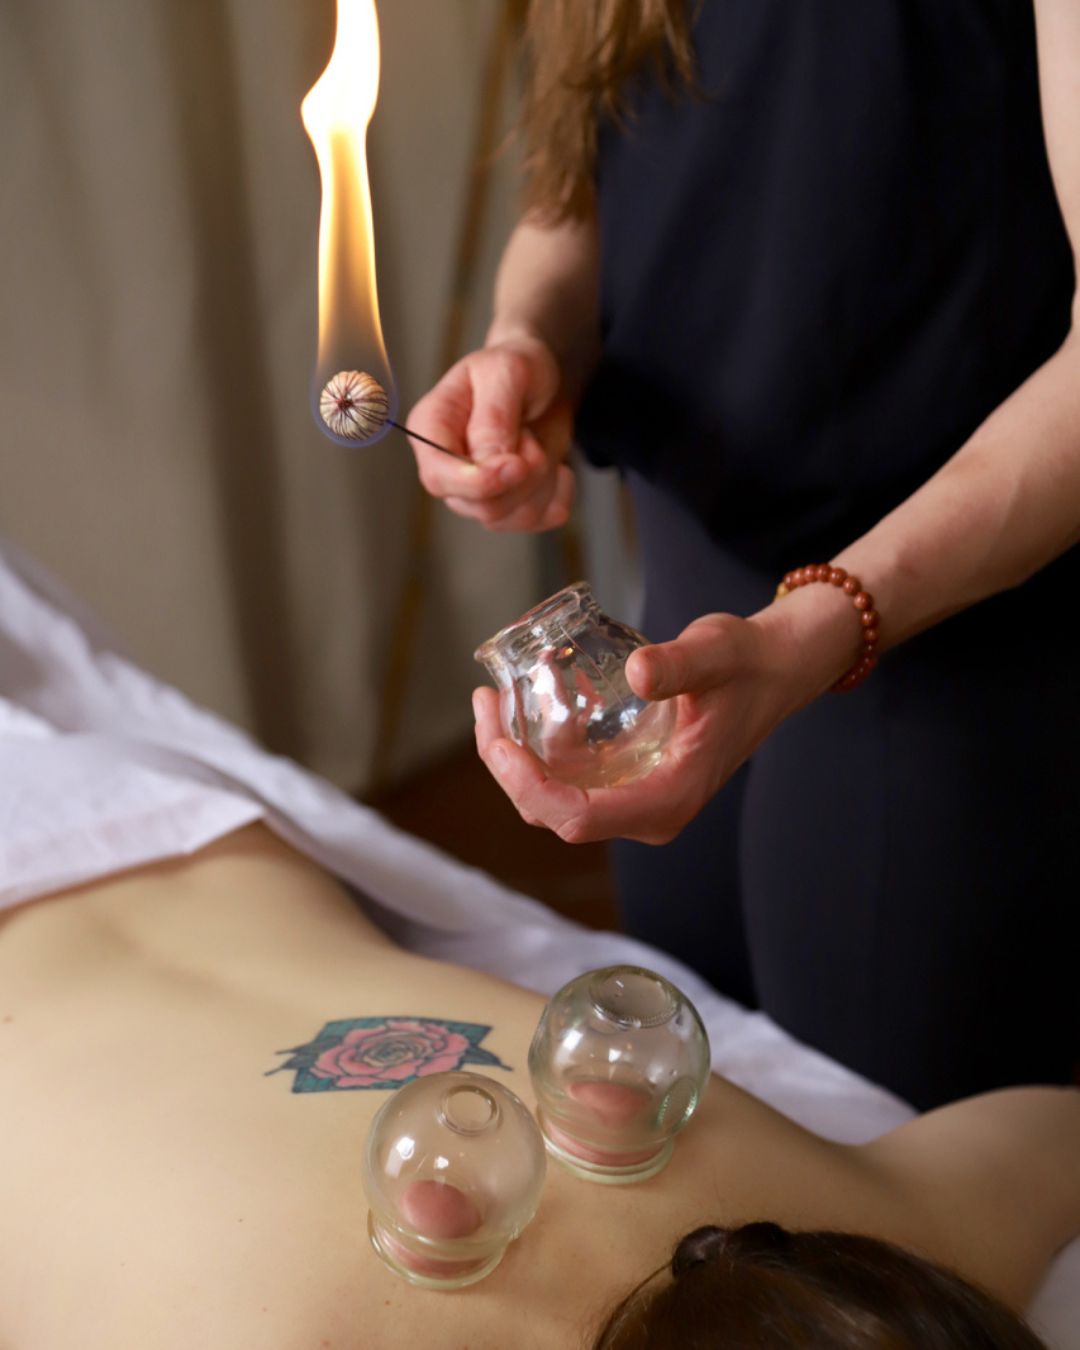 fire cupping on patients back during acupuncture follow-up appointment